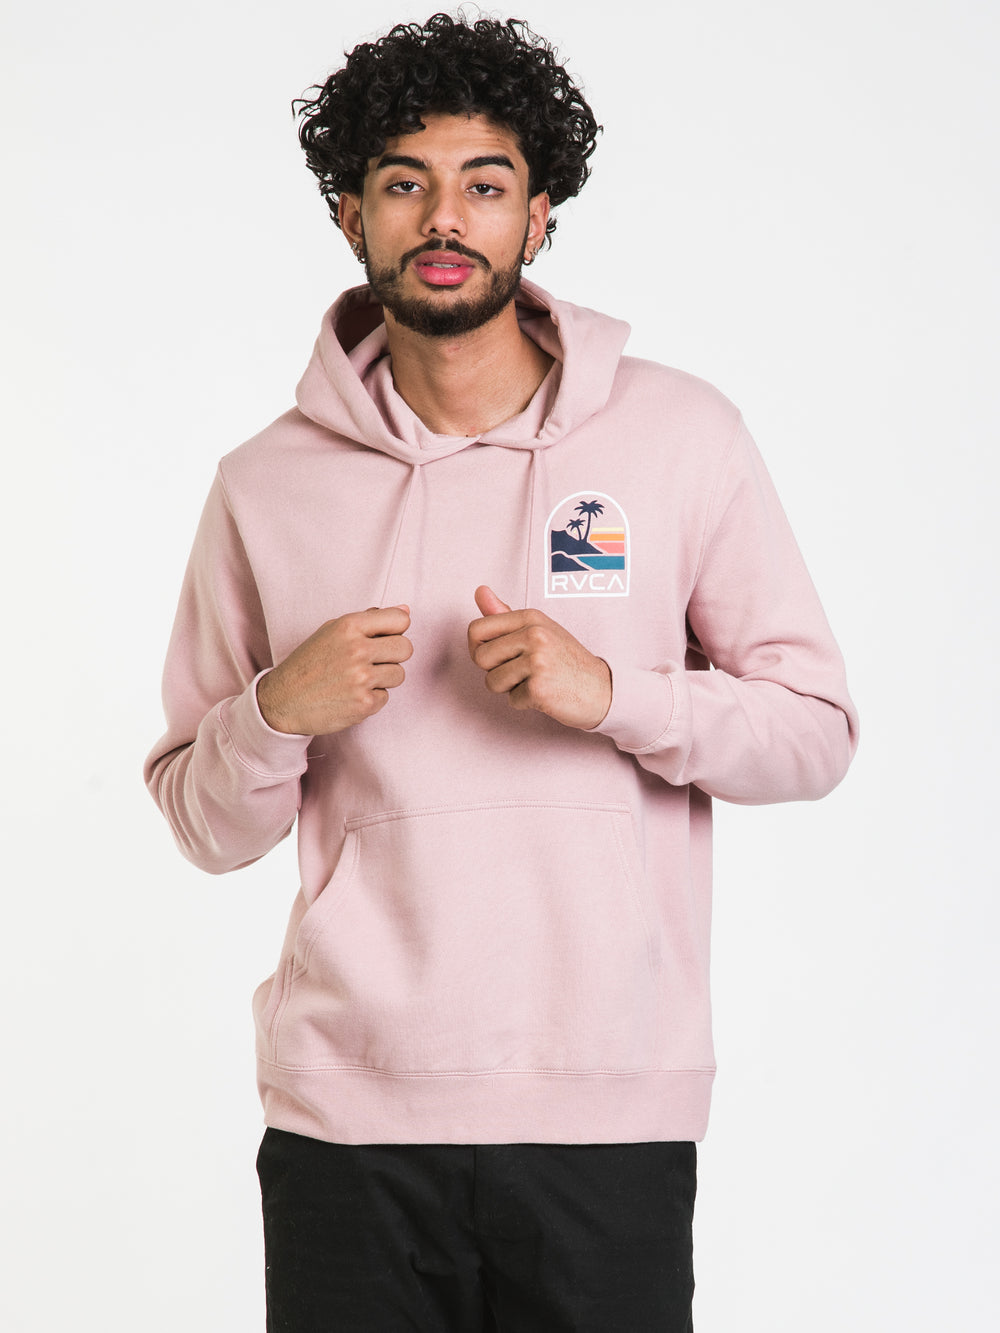 RVCA VISTA PULL OVER HOODIE - DÉSTOCKAGE